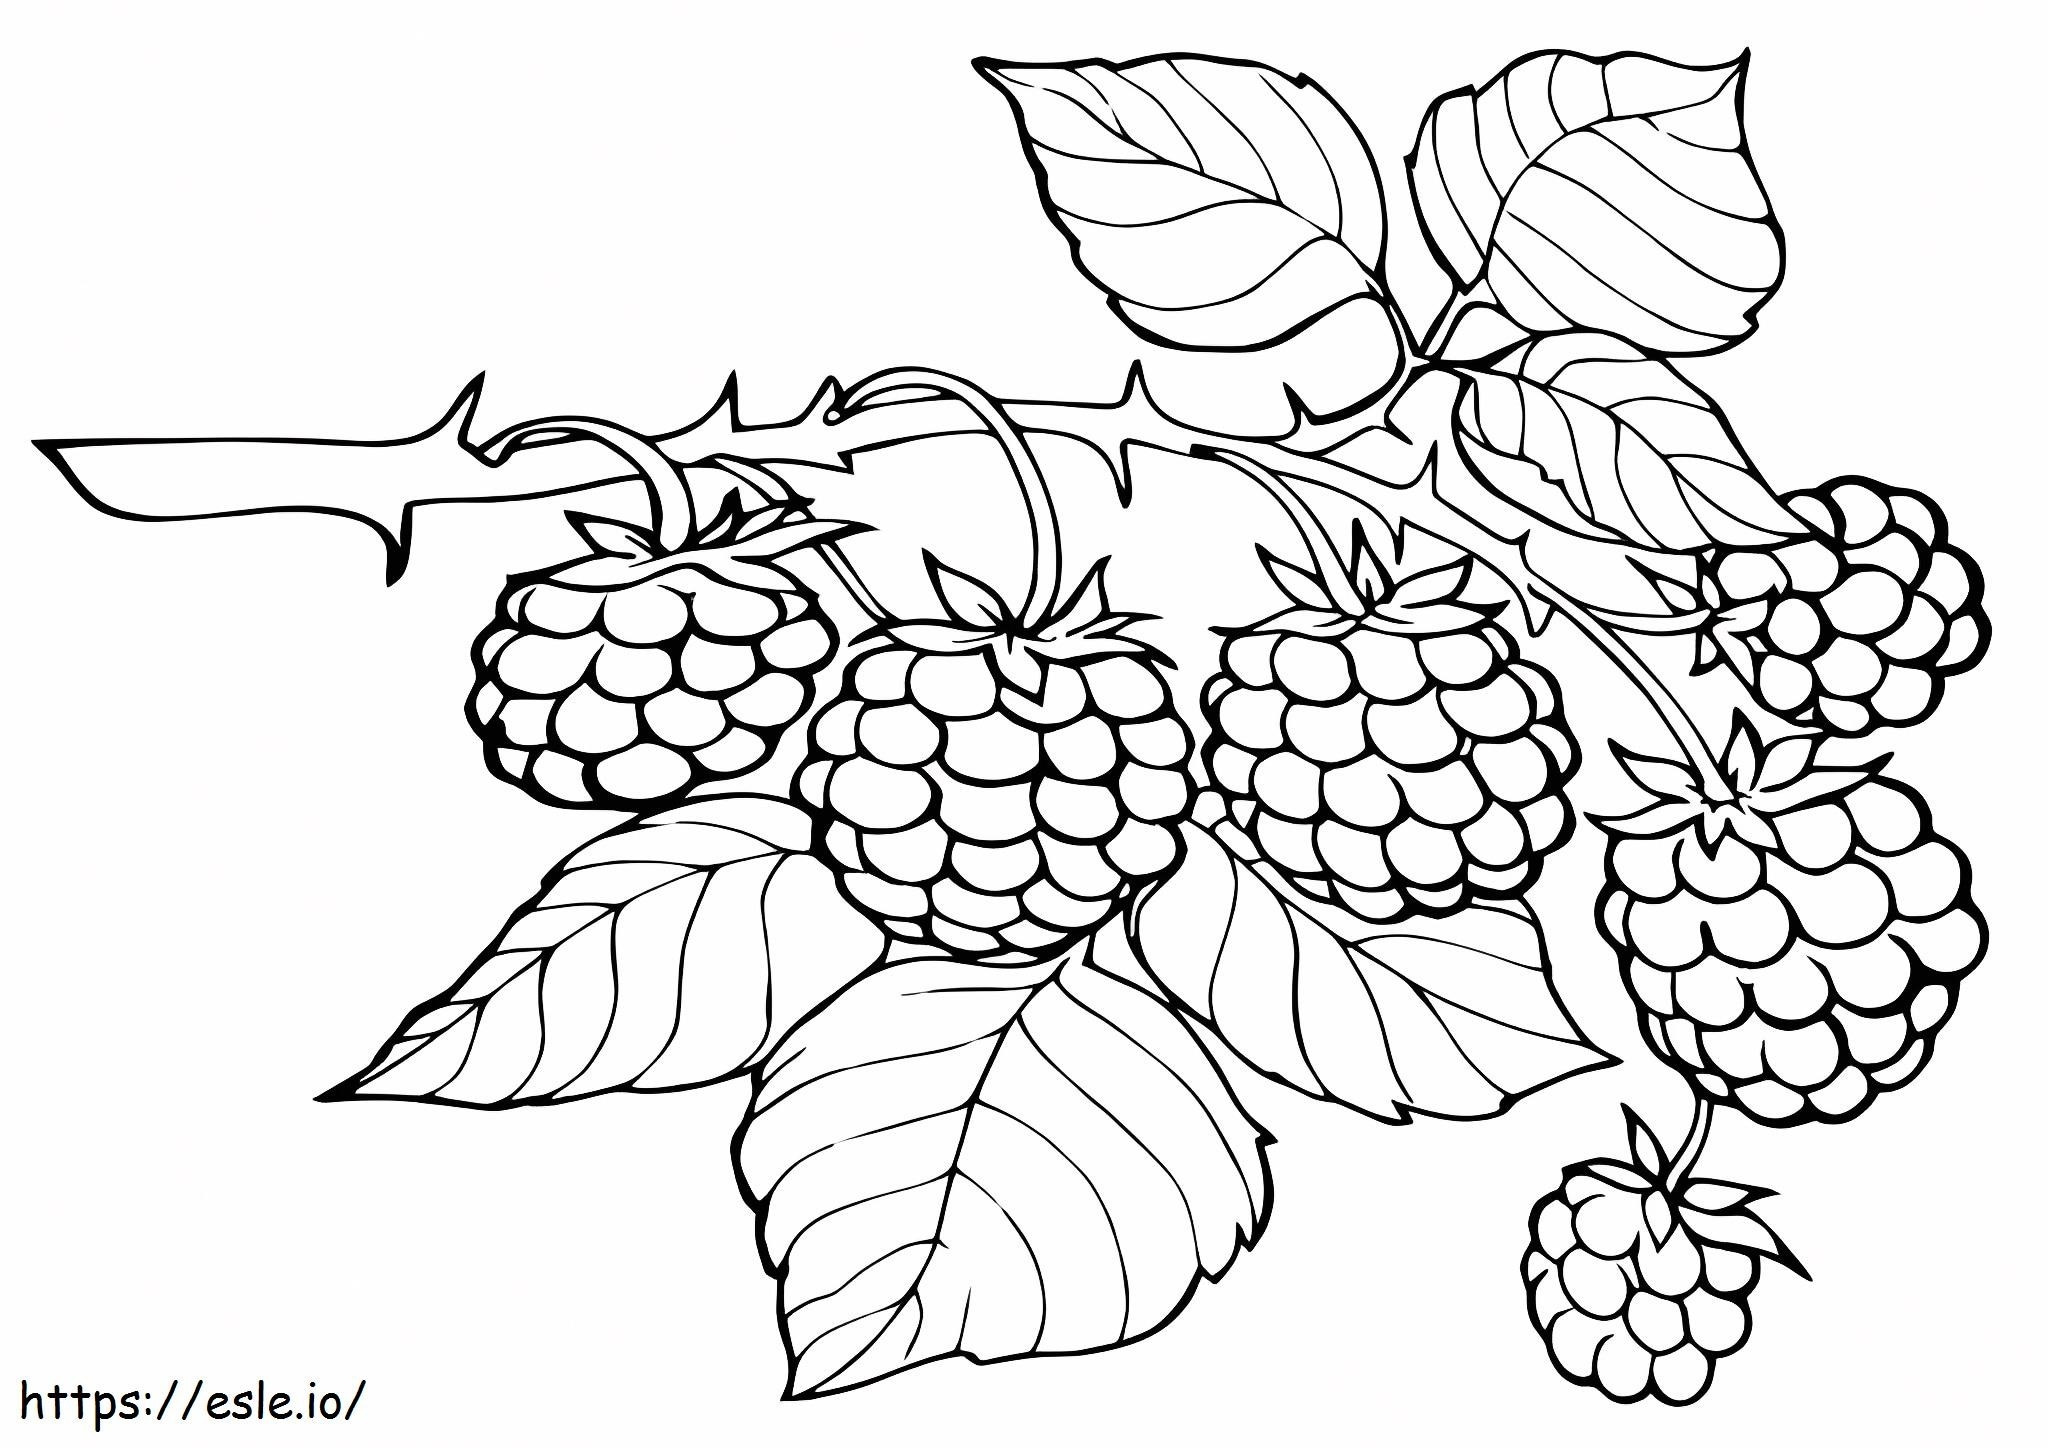 Six Blackberries On Tree Branch coloring page